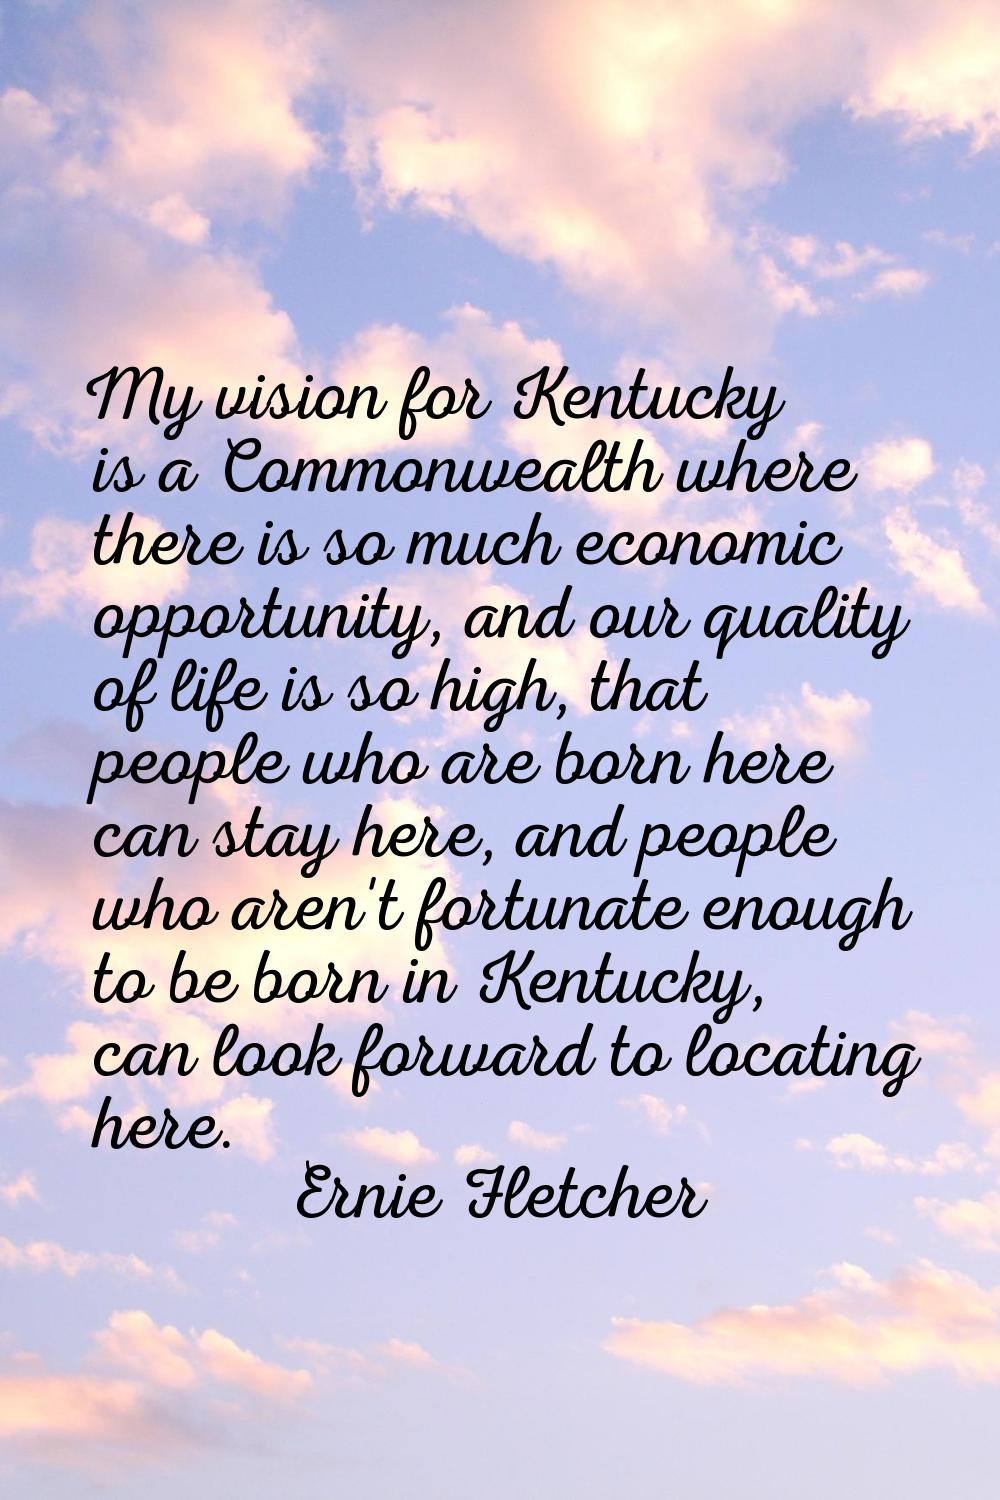 My vision for Kentucky is a Commonwealth where there is so much economic opportunity, and our quali